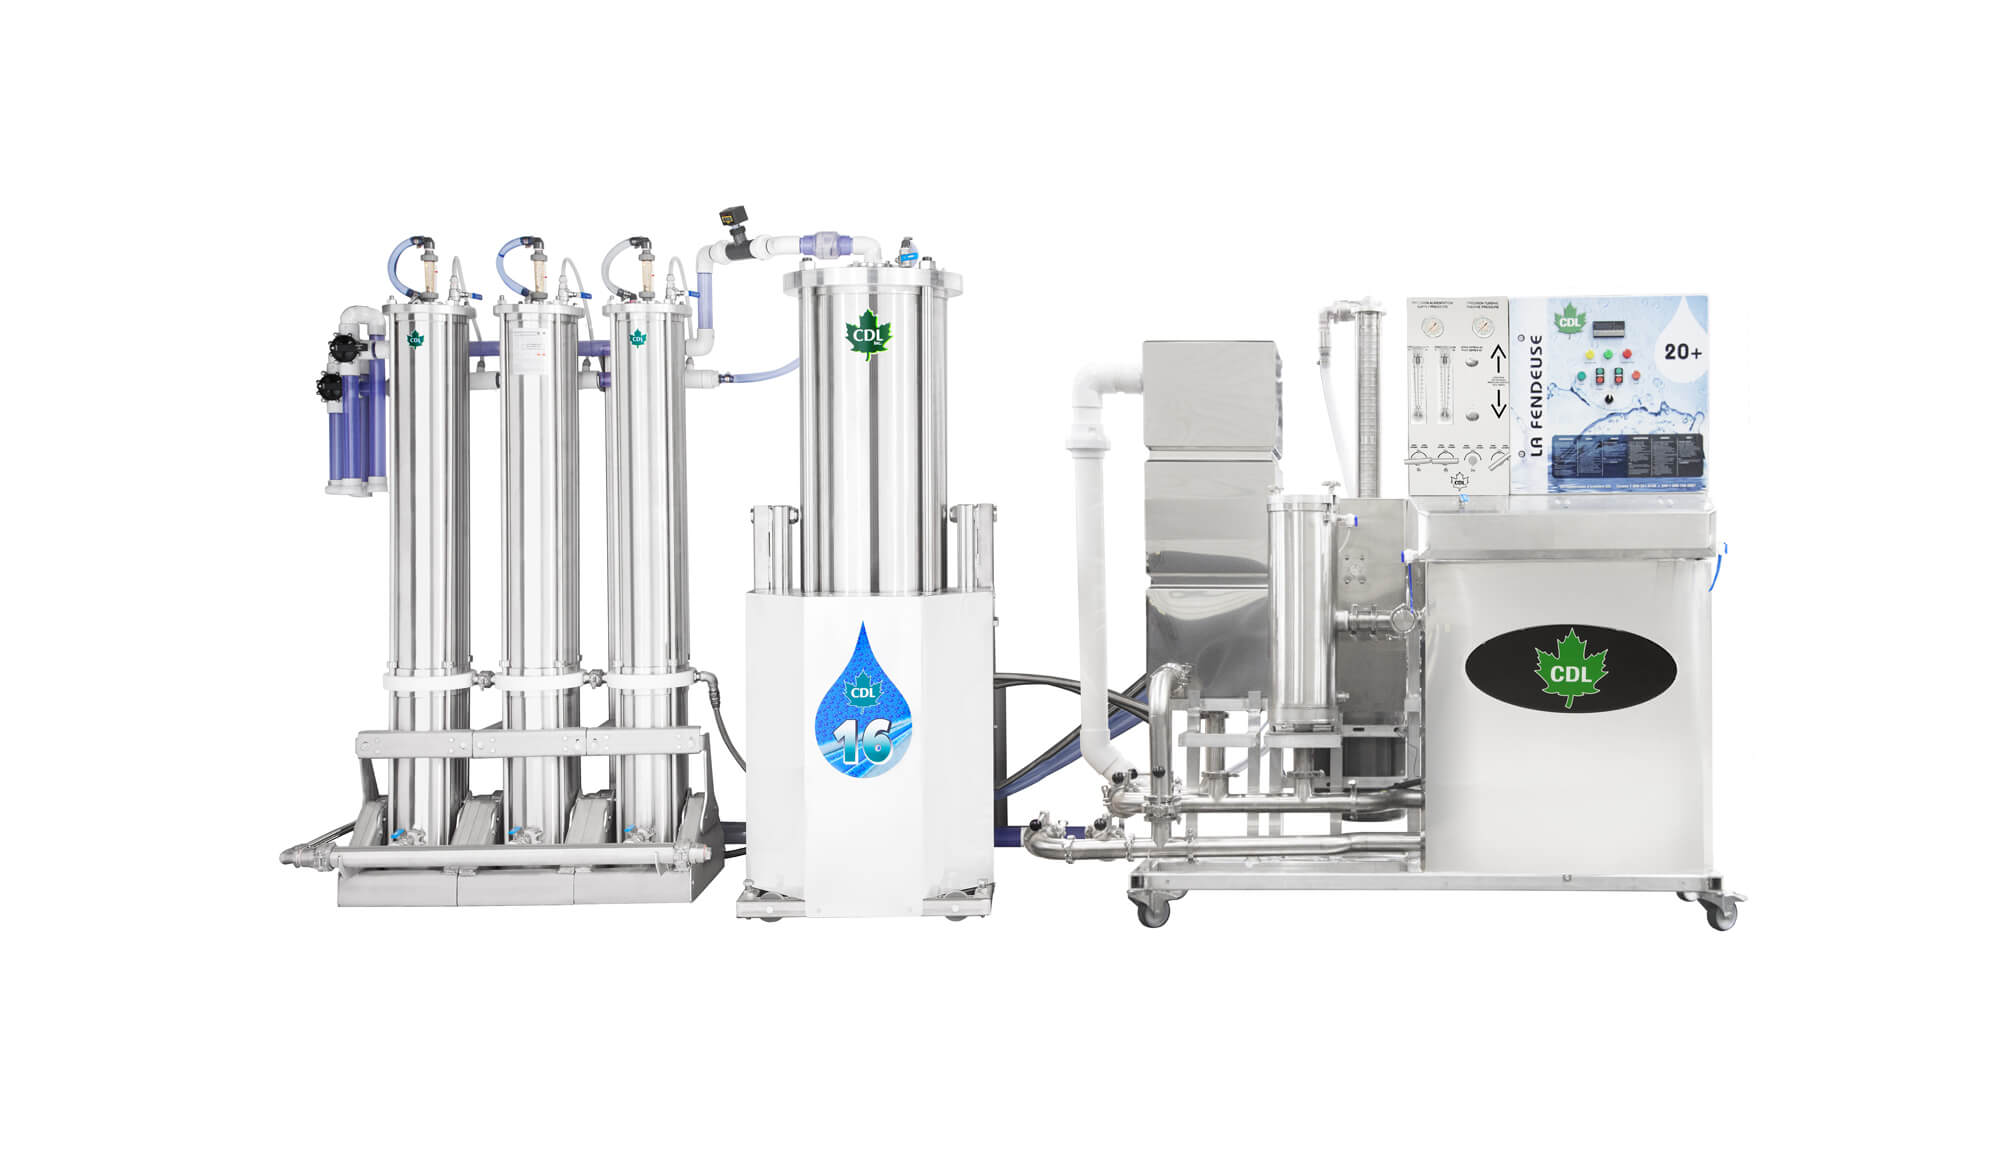 concentrateurs 20 + CDL 20 + reverse osmosis